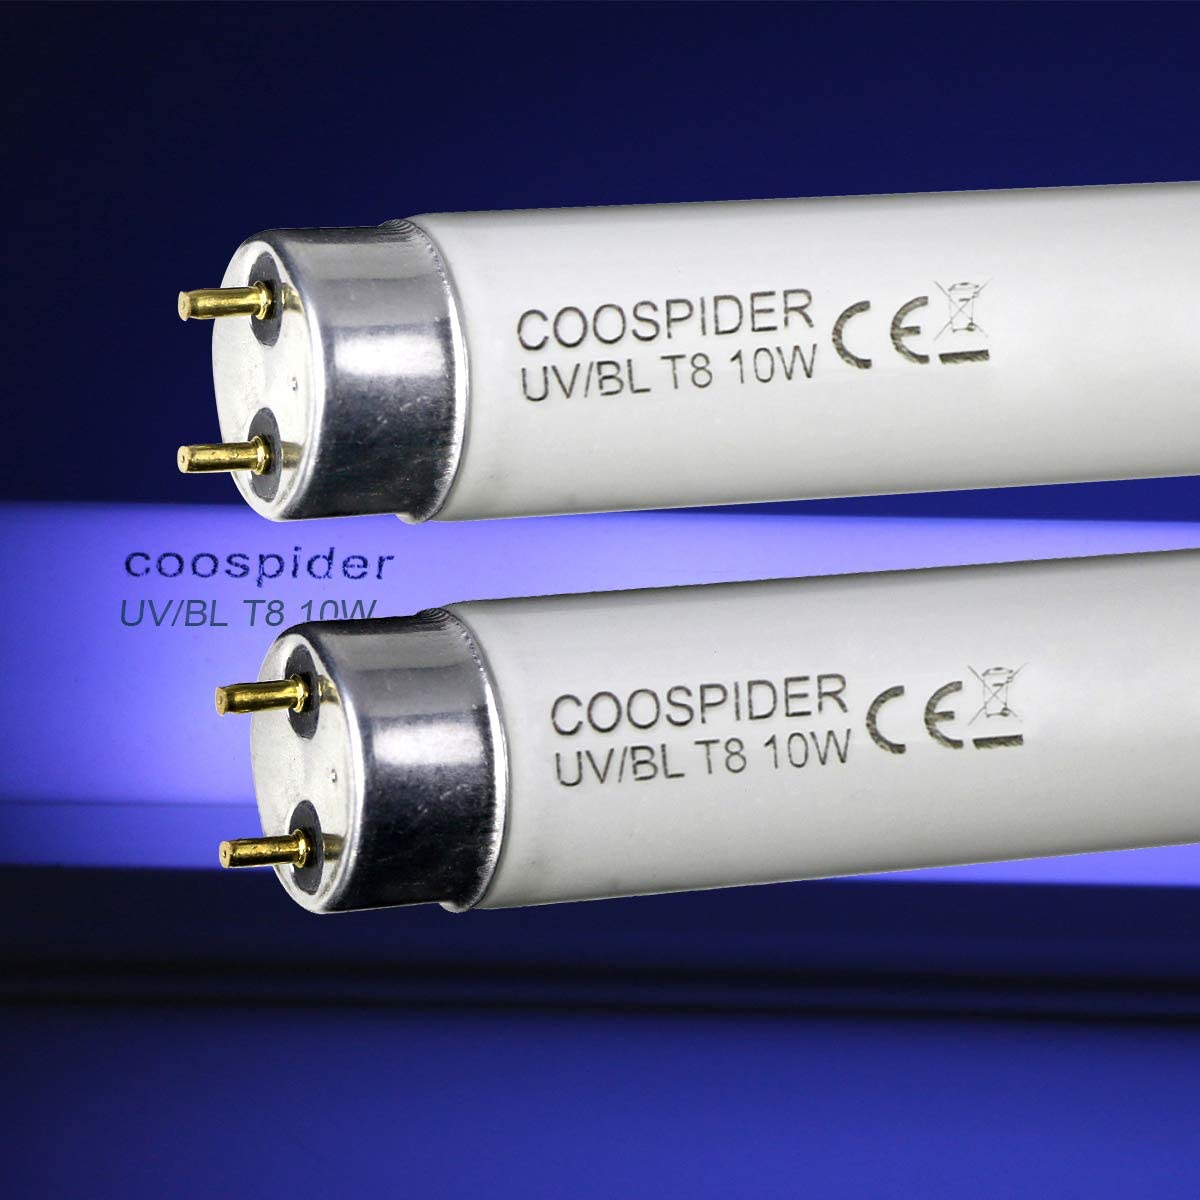 2-Pack T8 F10 UV BL 10W Replacement Light Bulb CFL Fluorescent Straight Tube 13 Inch